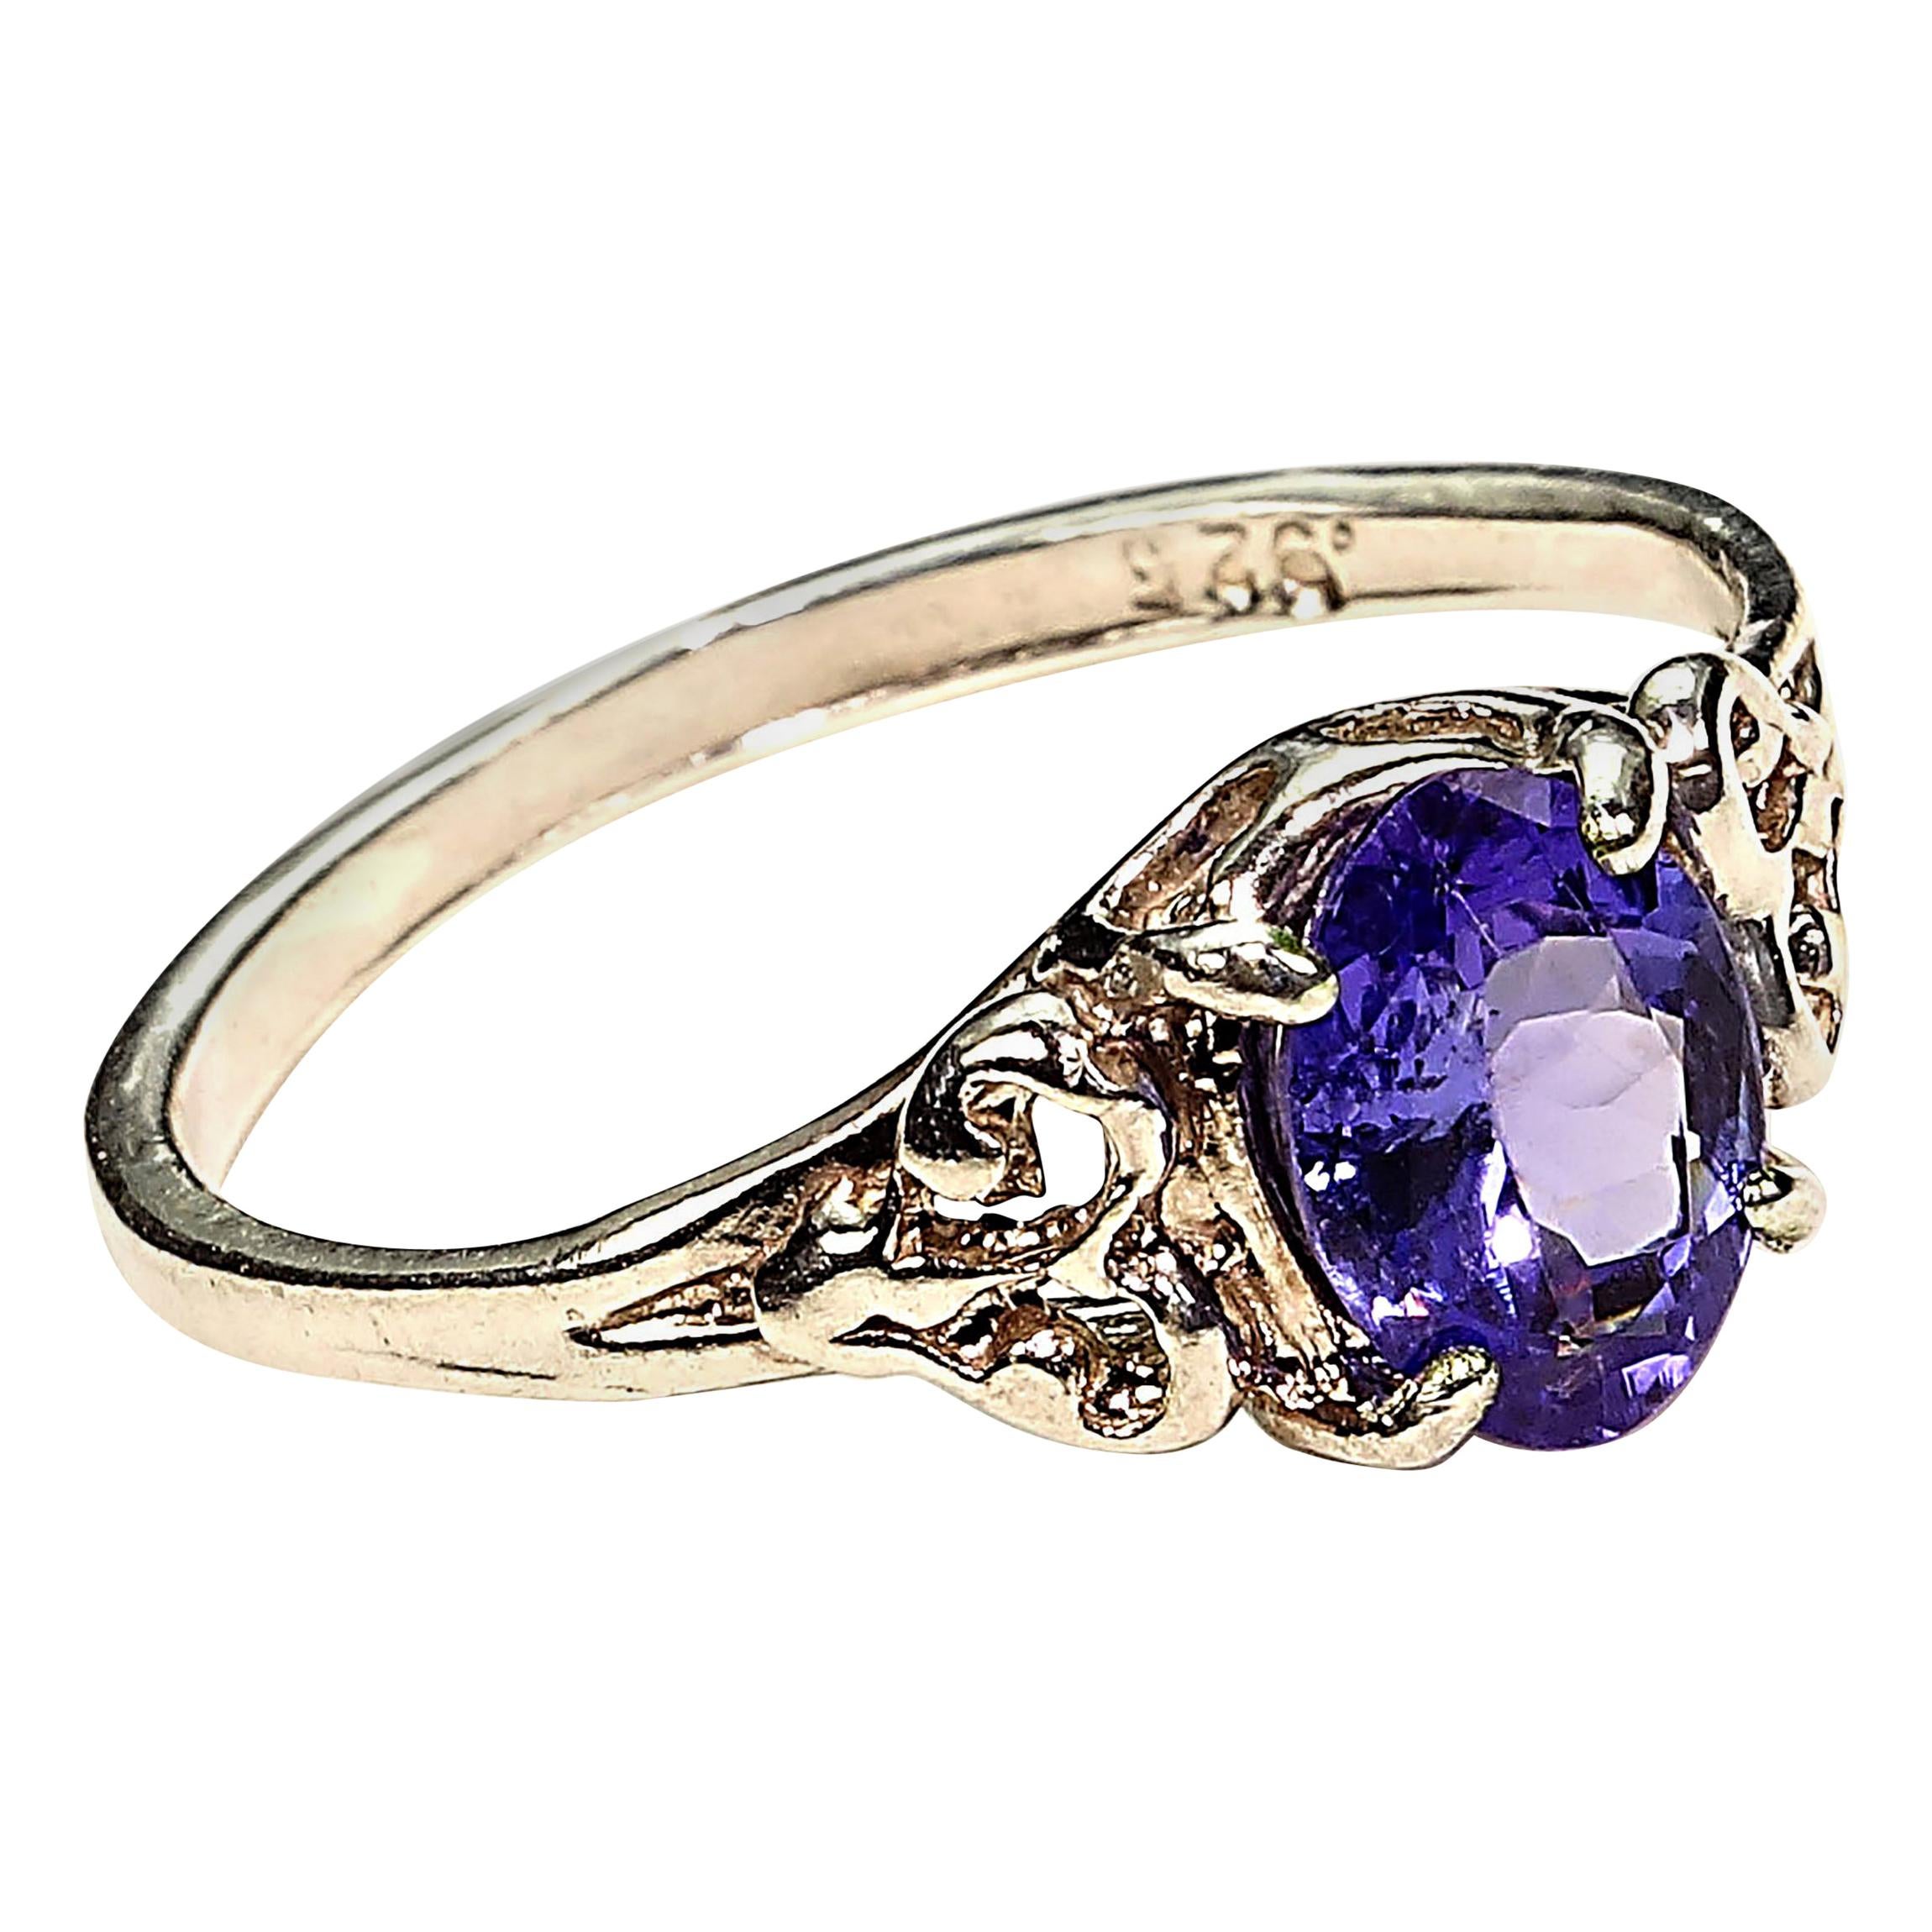  AJD Glittering Oval Tanzanite in Detailed Sterling Silver Cocktail Ring